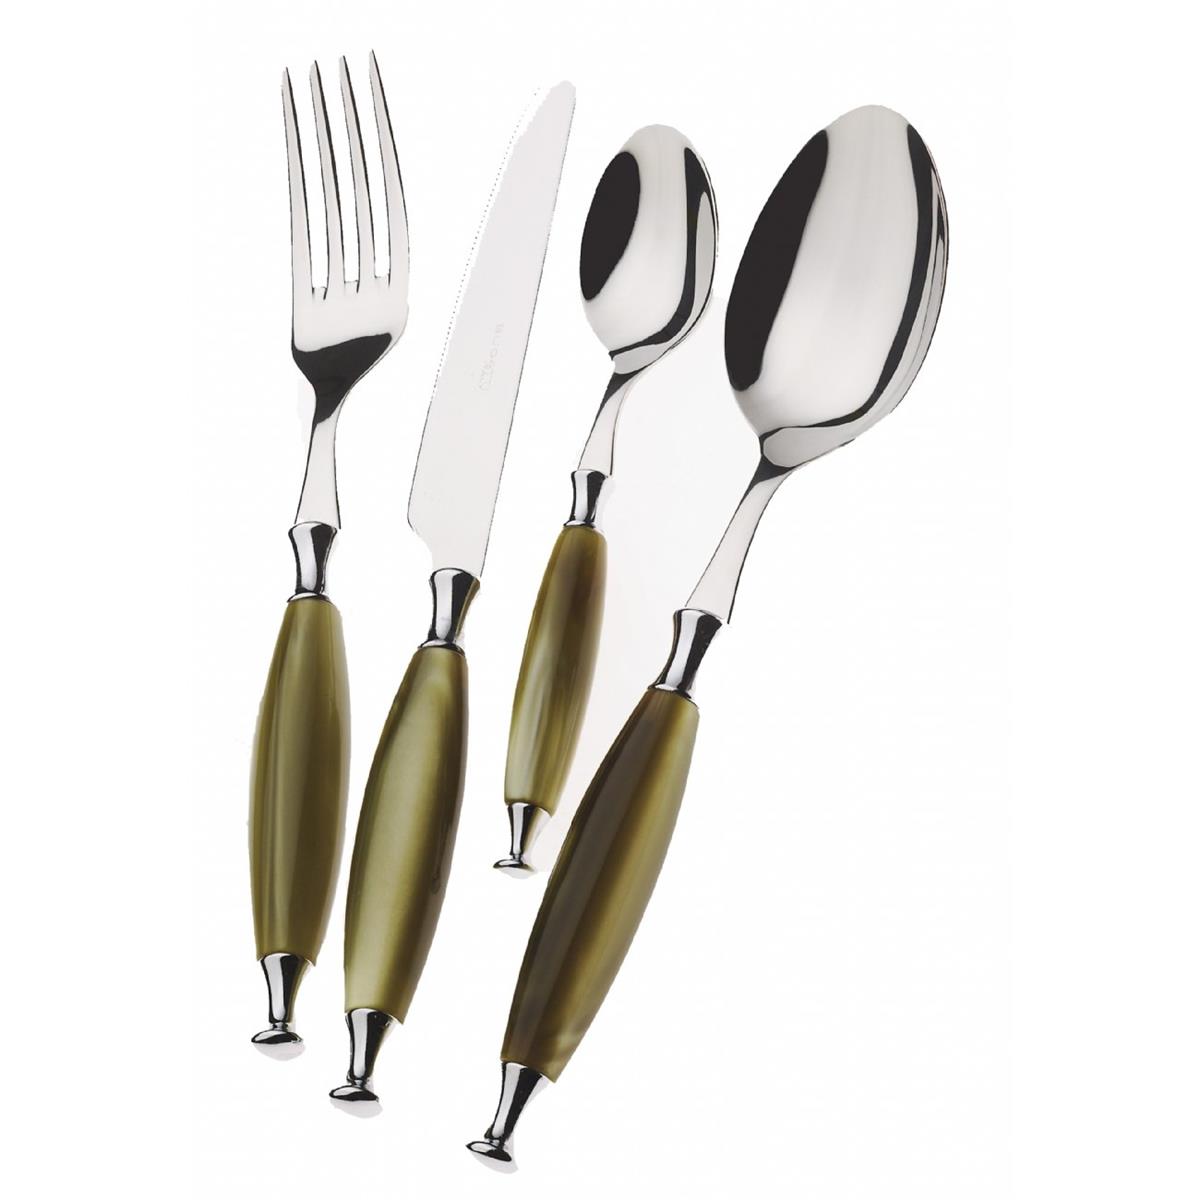 COUNTRY Cutlery Service - 24 Pieces - Chartreuse Green/Silk - Chromed Ring